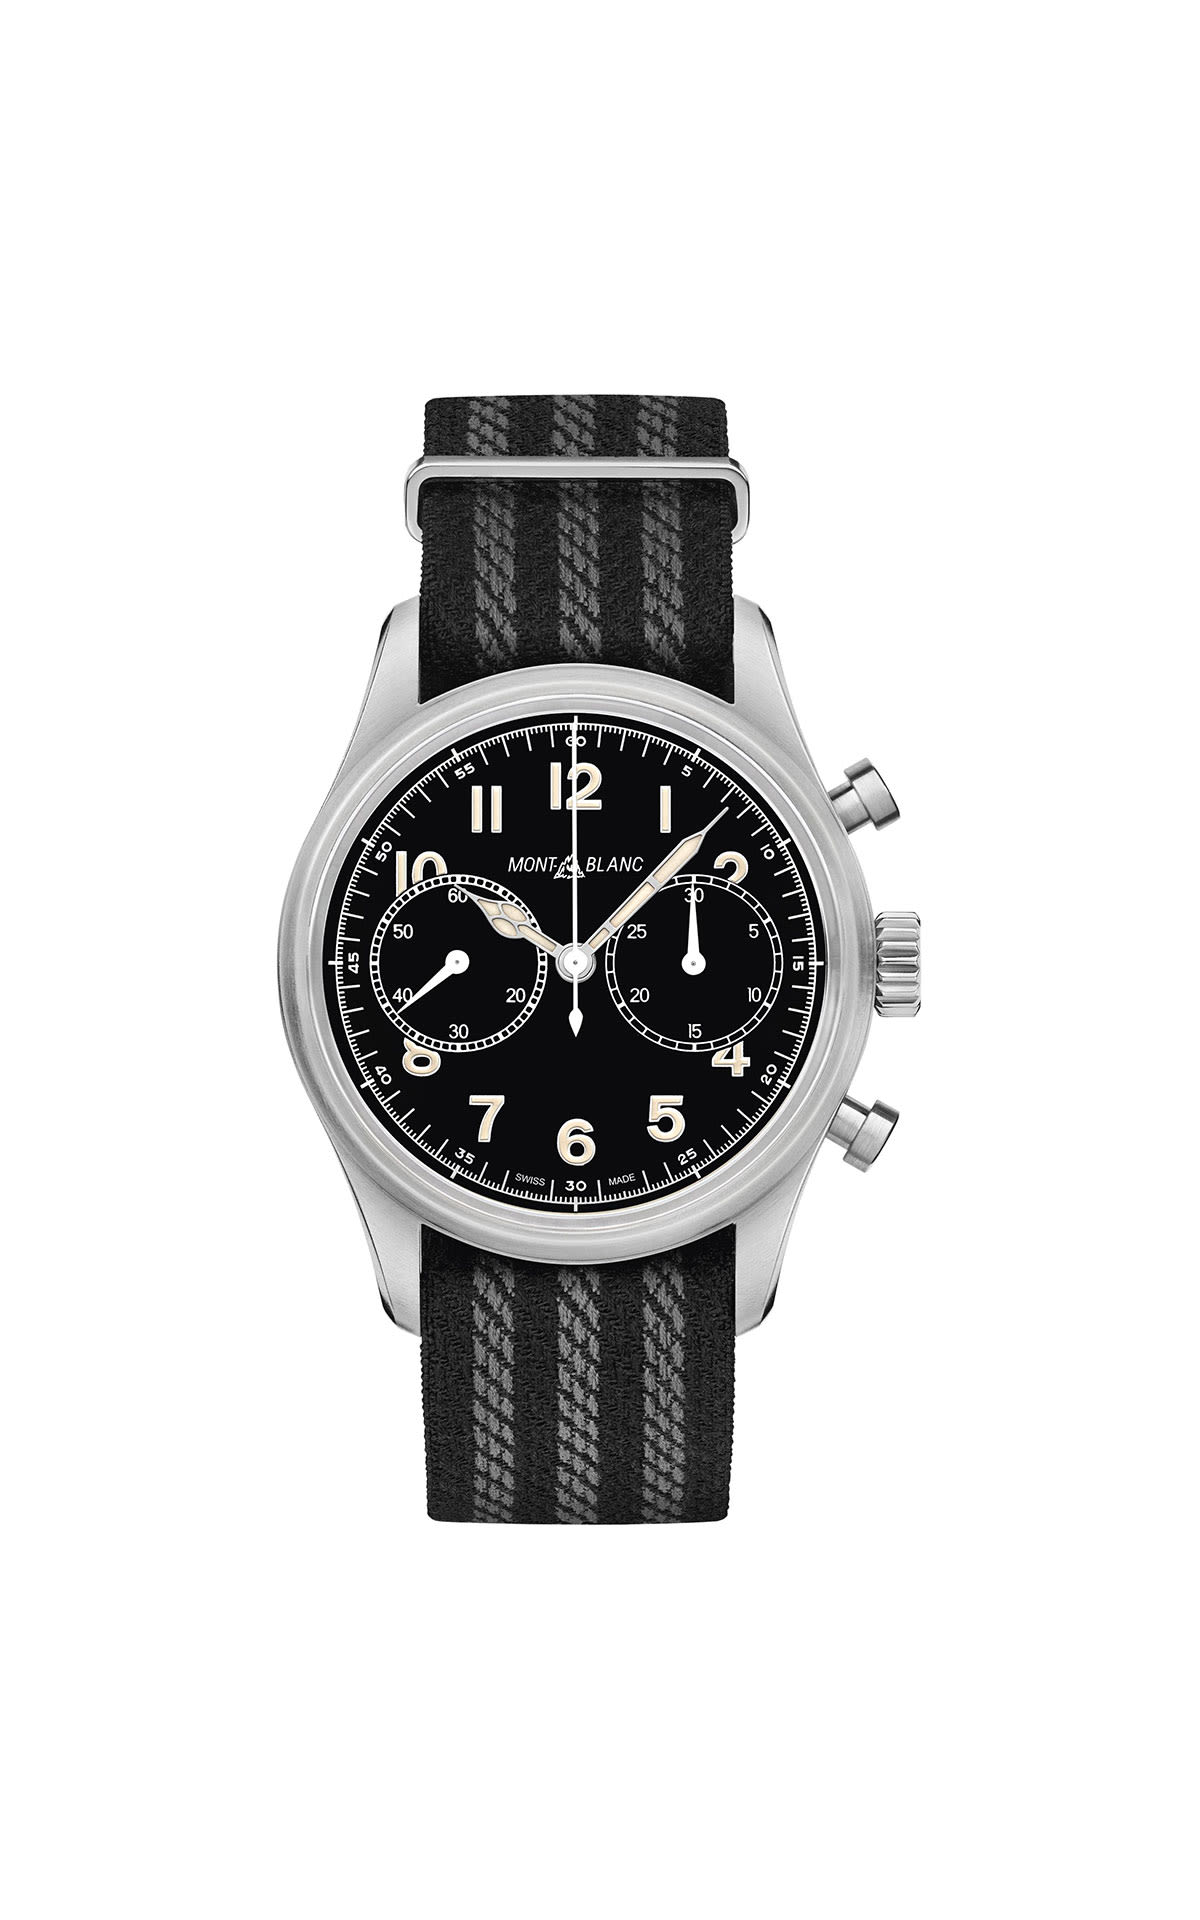 Watch 1858 Automatic Chronograph Montblanc